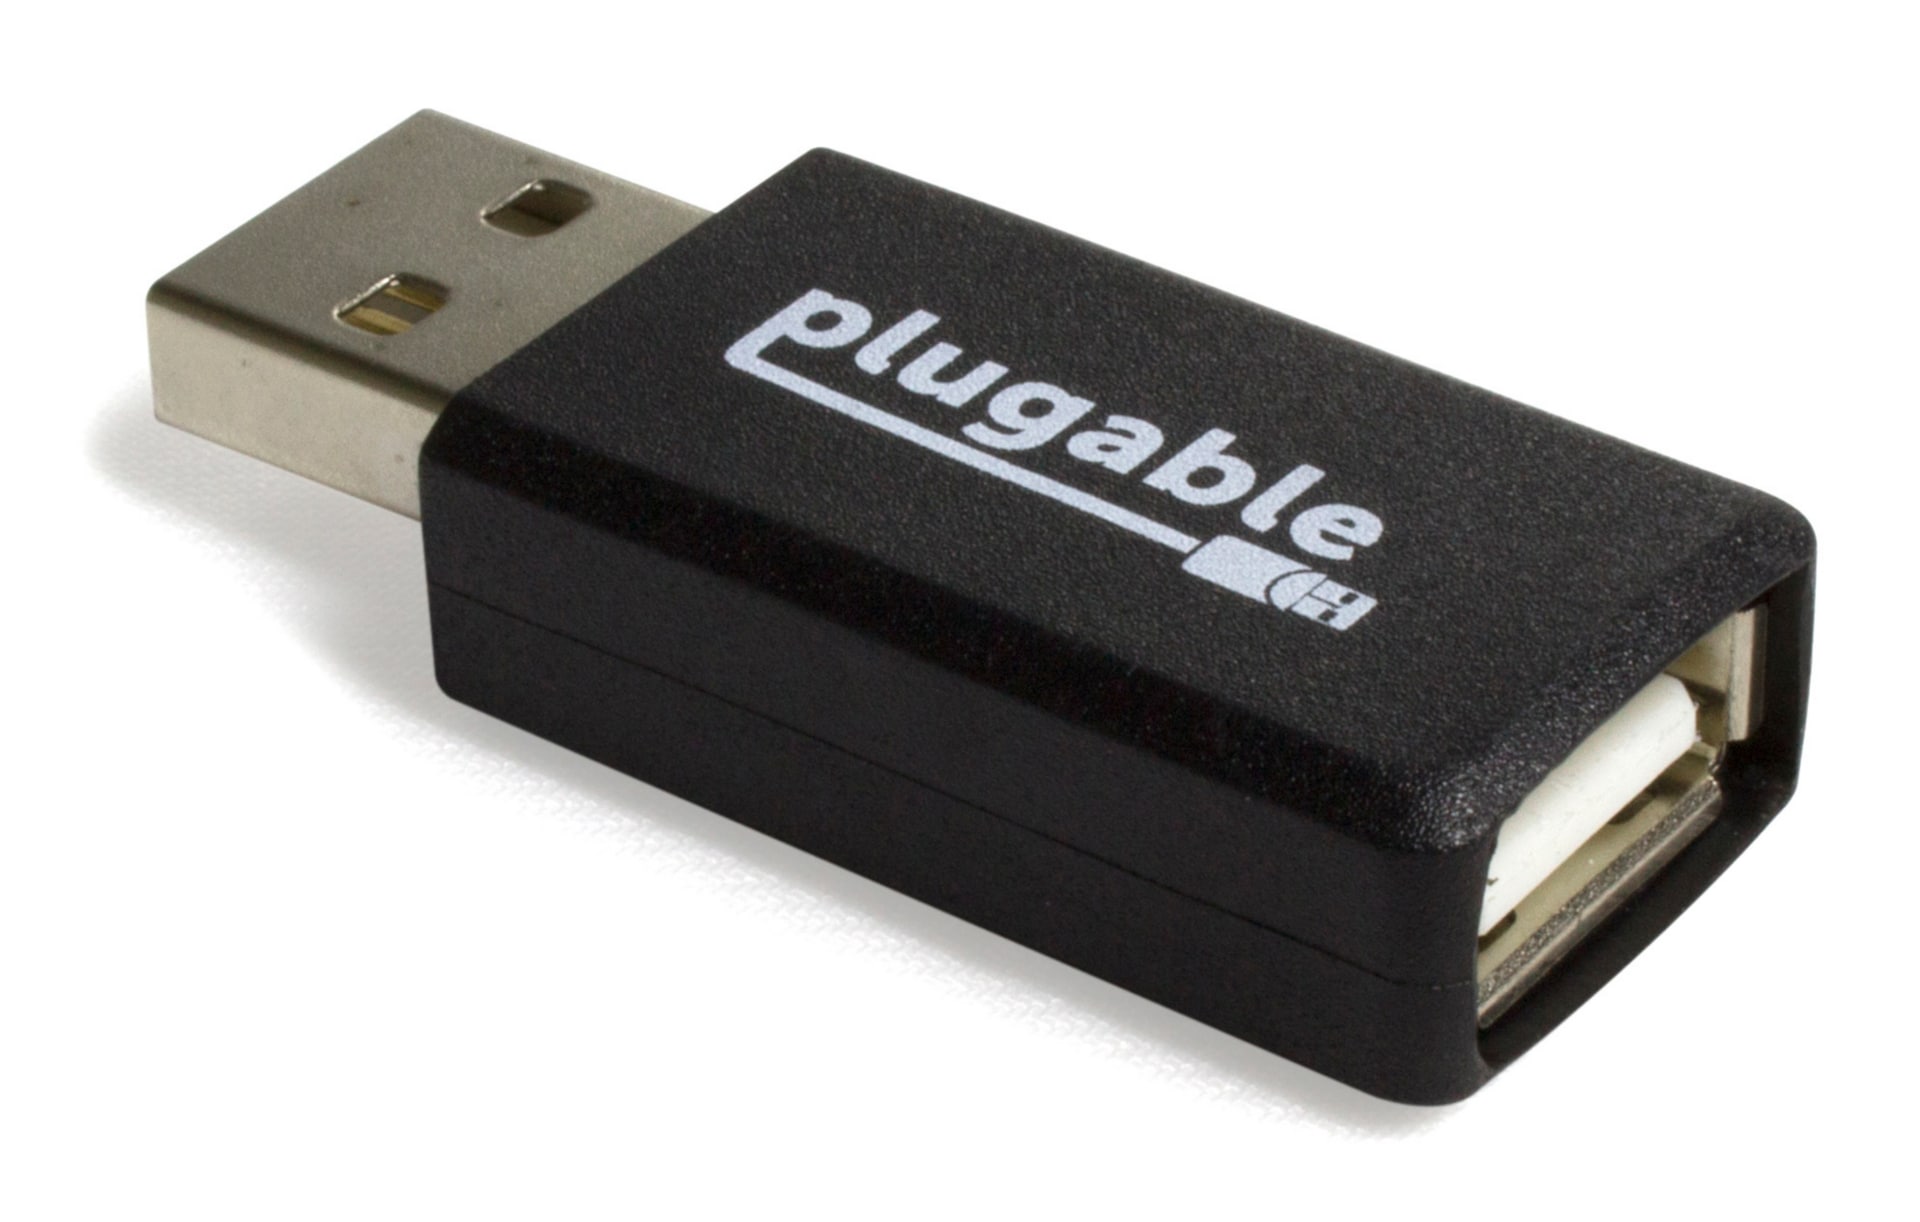 Plugable USB Data Blocker for Juice Jacking, Universal Charge-Only Adapter